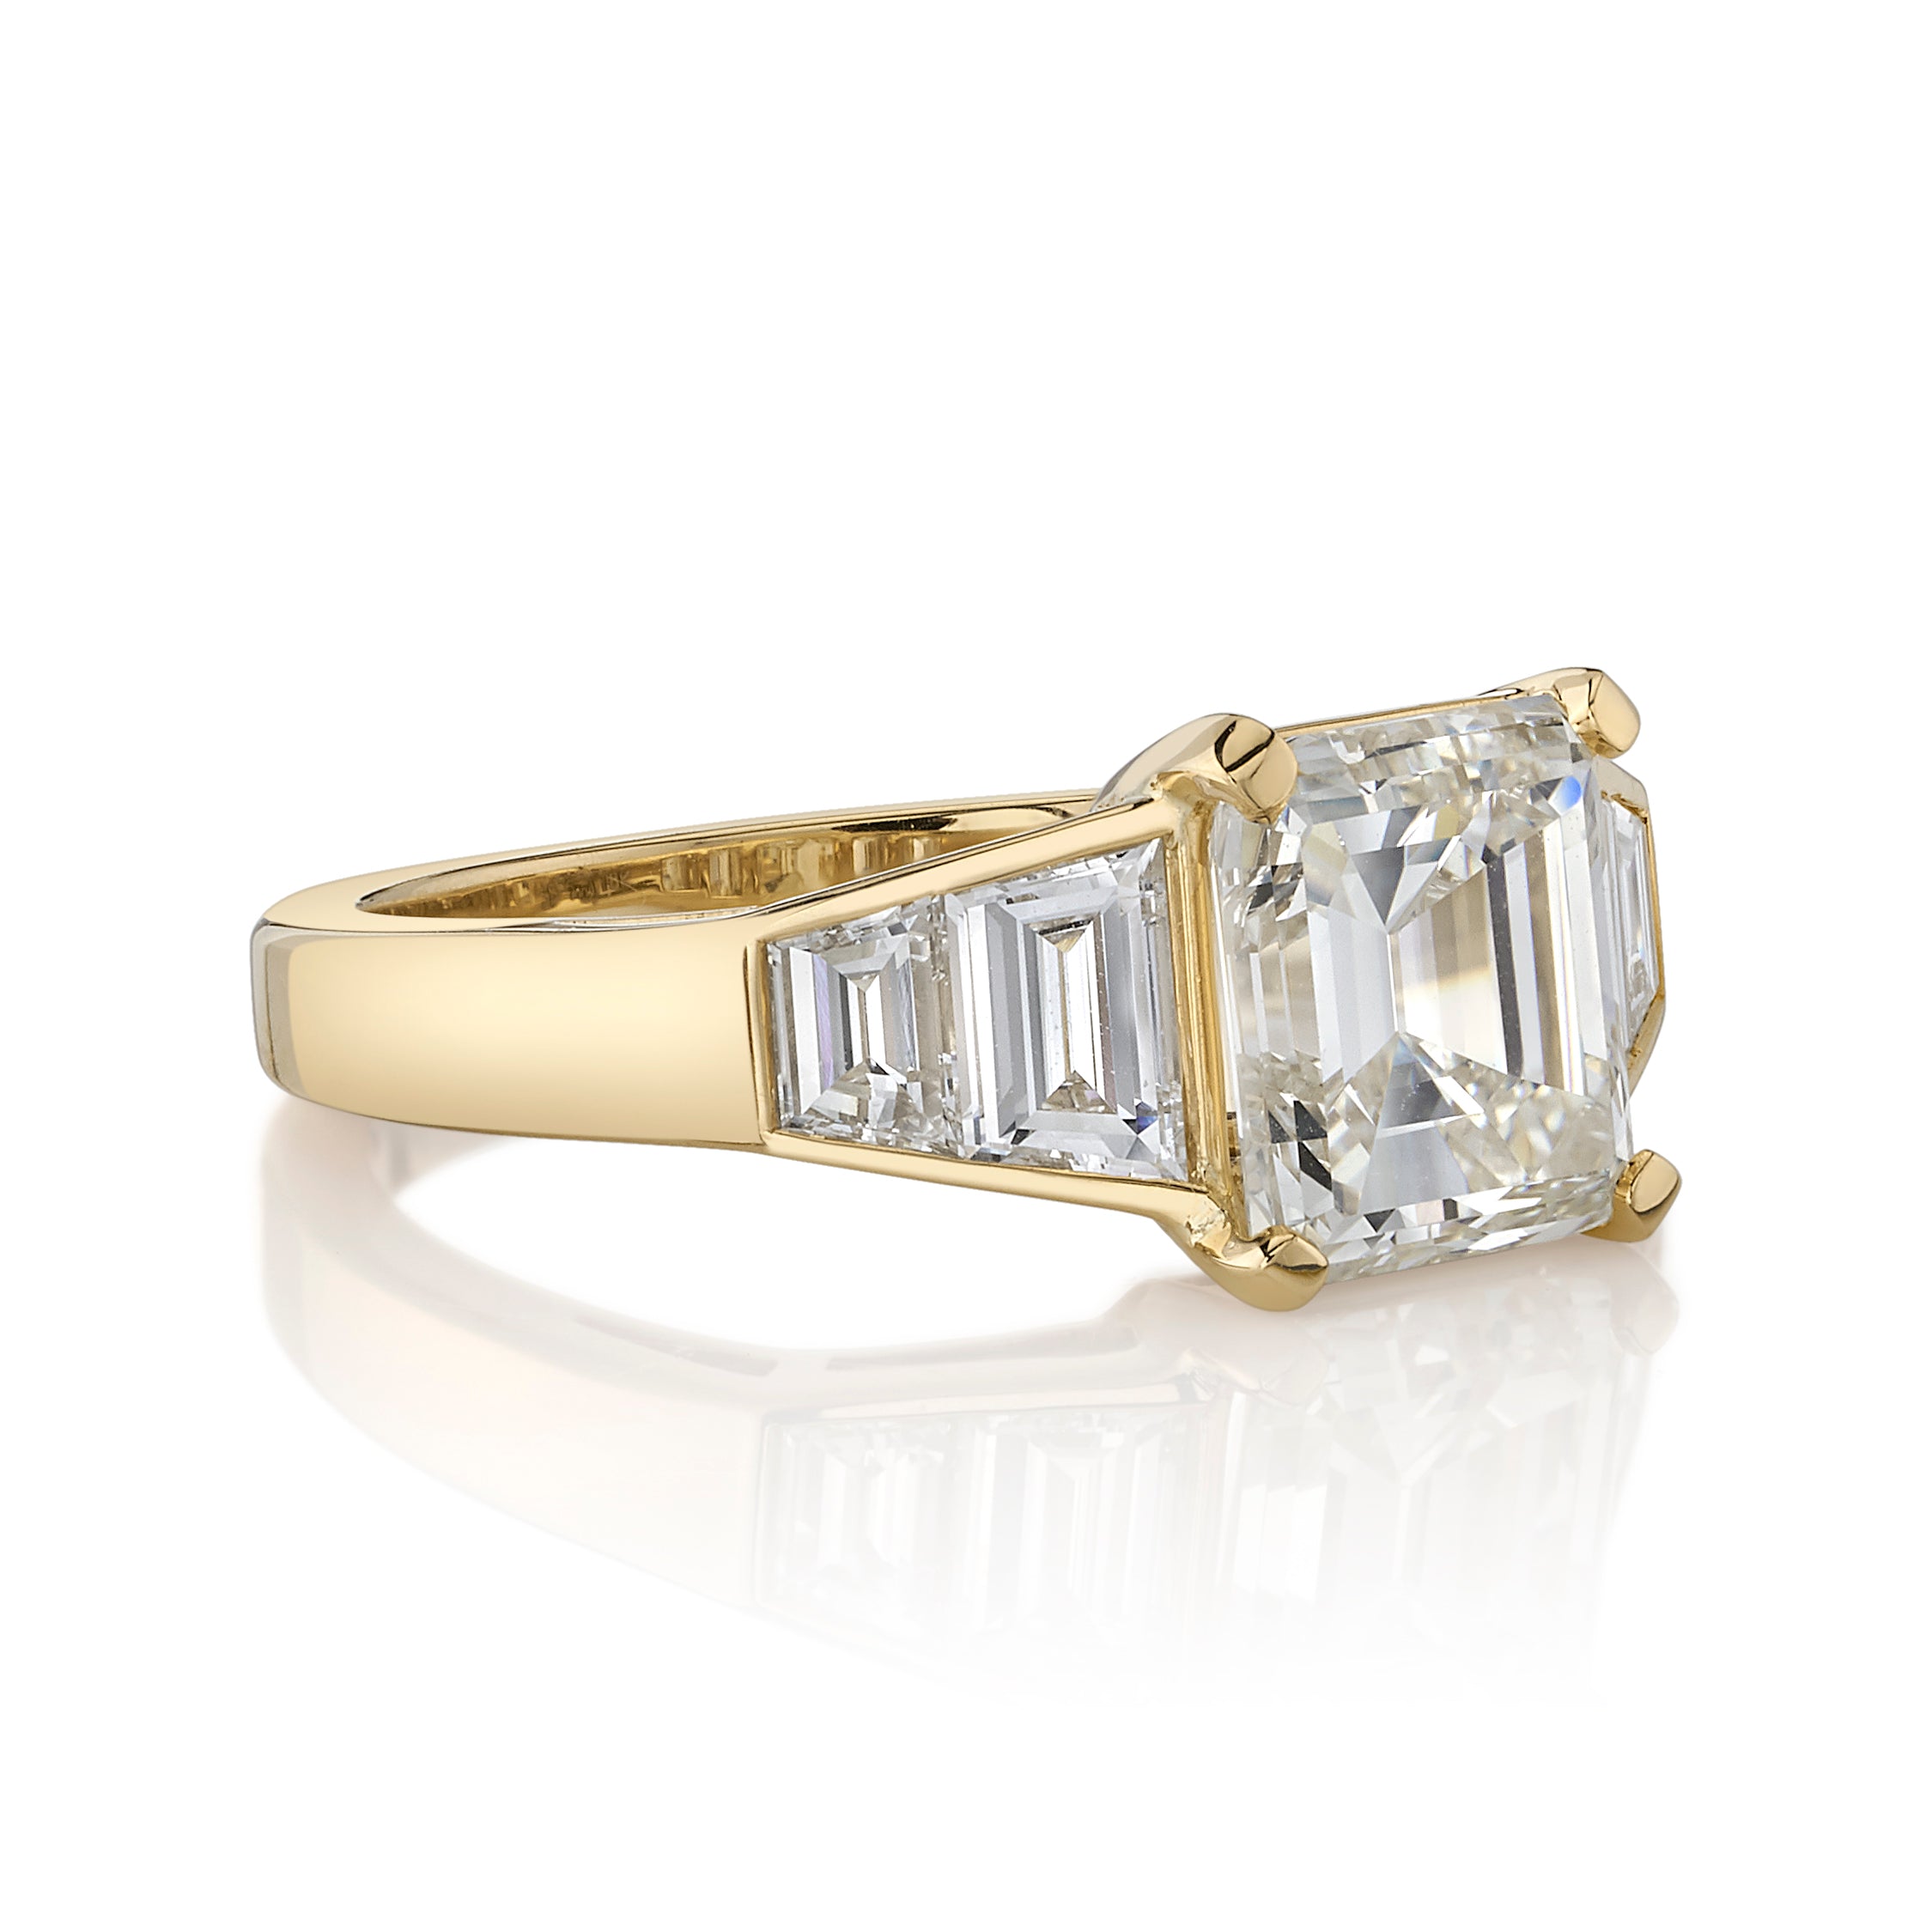 SINGLE STONE CASSIDY RING featuring 2.60ct L/SI1 GIA certified vintage Asscher cut diamond with 0.86ctw trapezoid cut accent diamonds set in a handcrafted 18K yellow gold mounting.